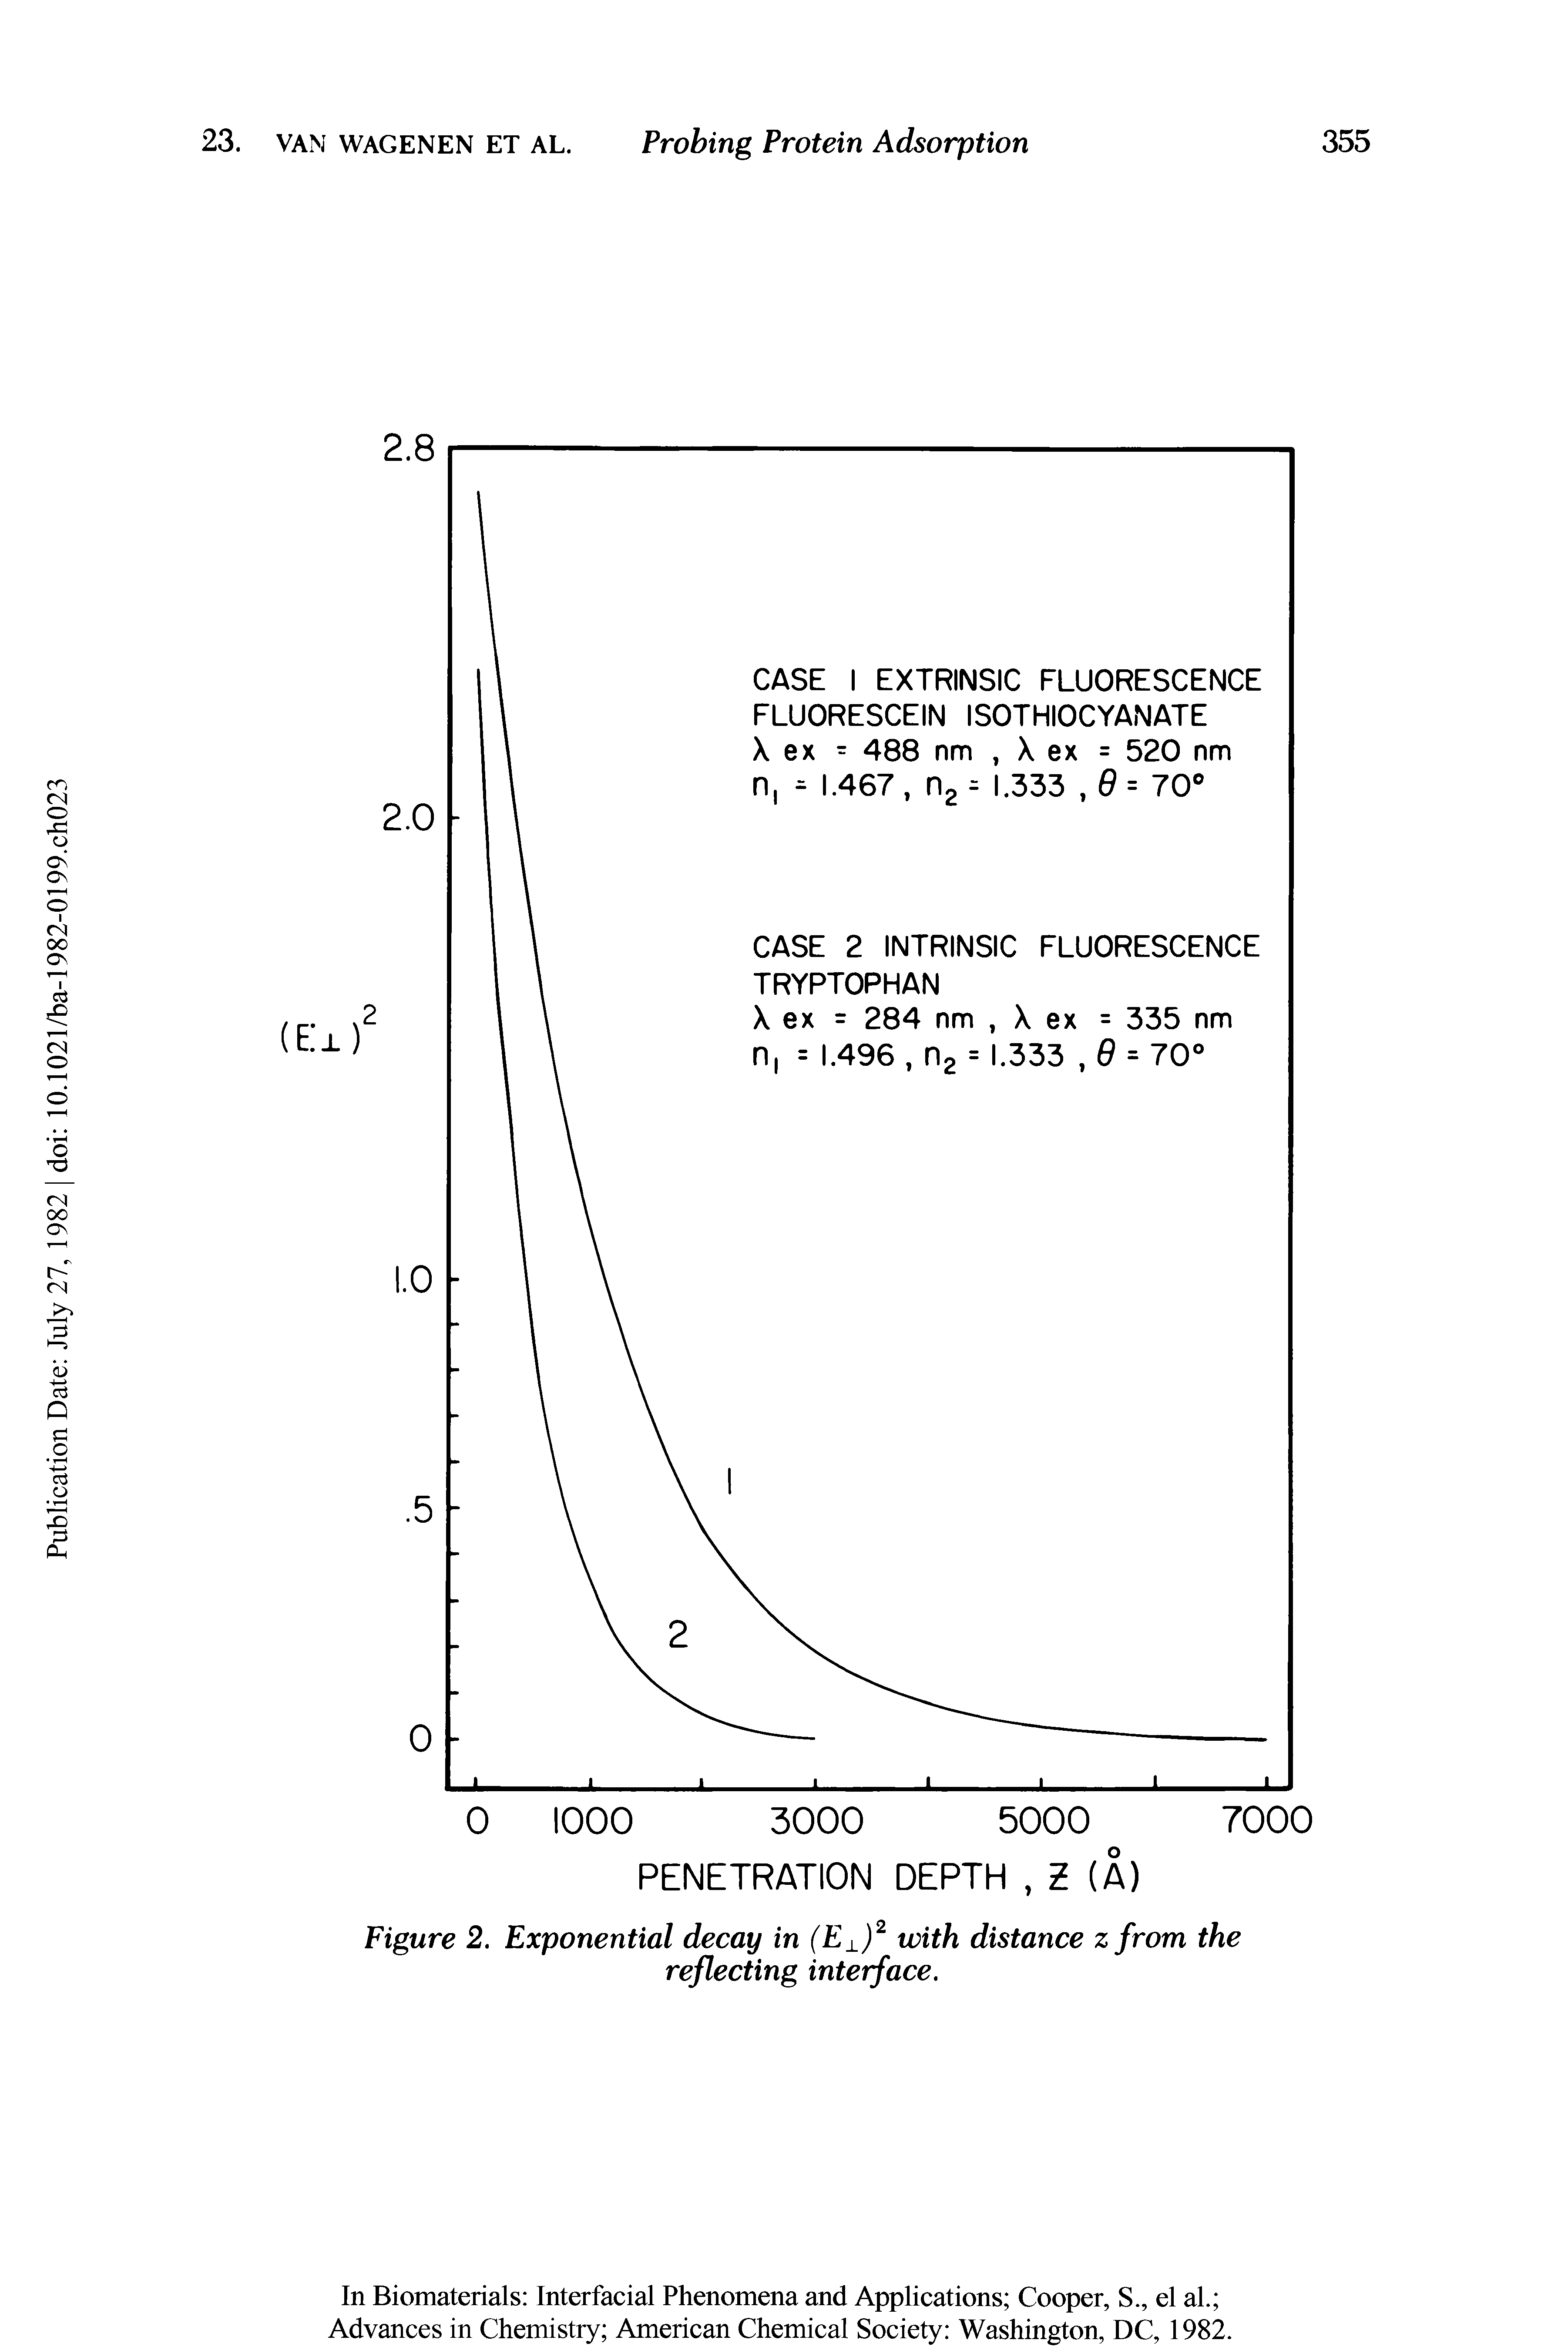 Figure 2. Exponential decay in (E )2 with distance zfrom the reflecting interface.